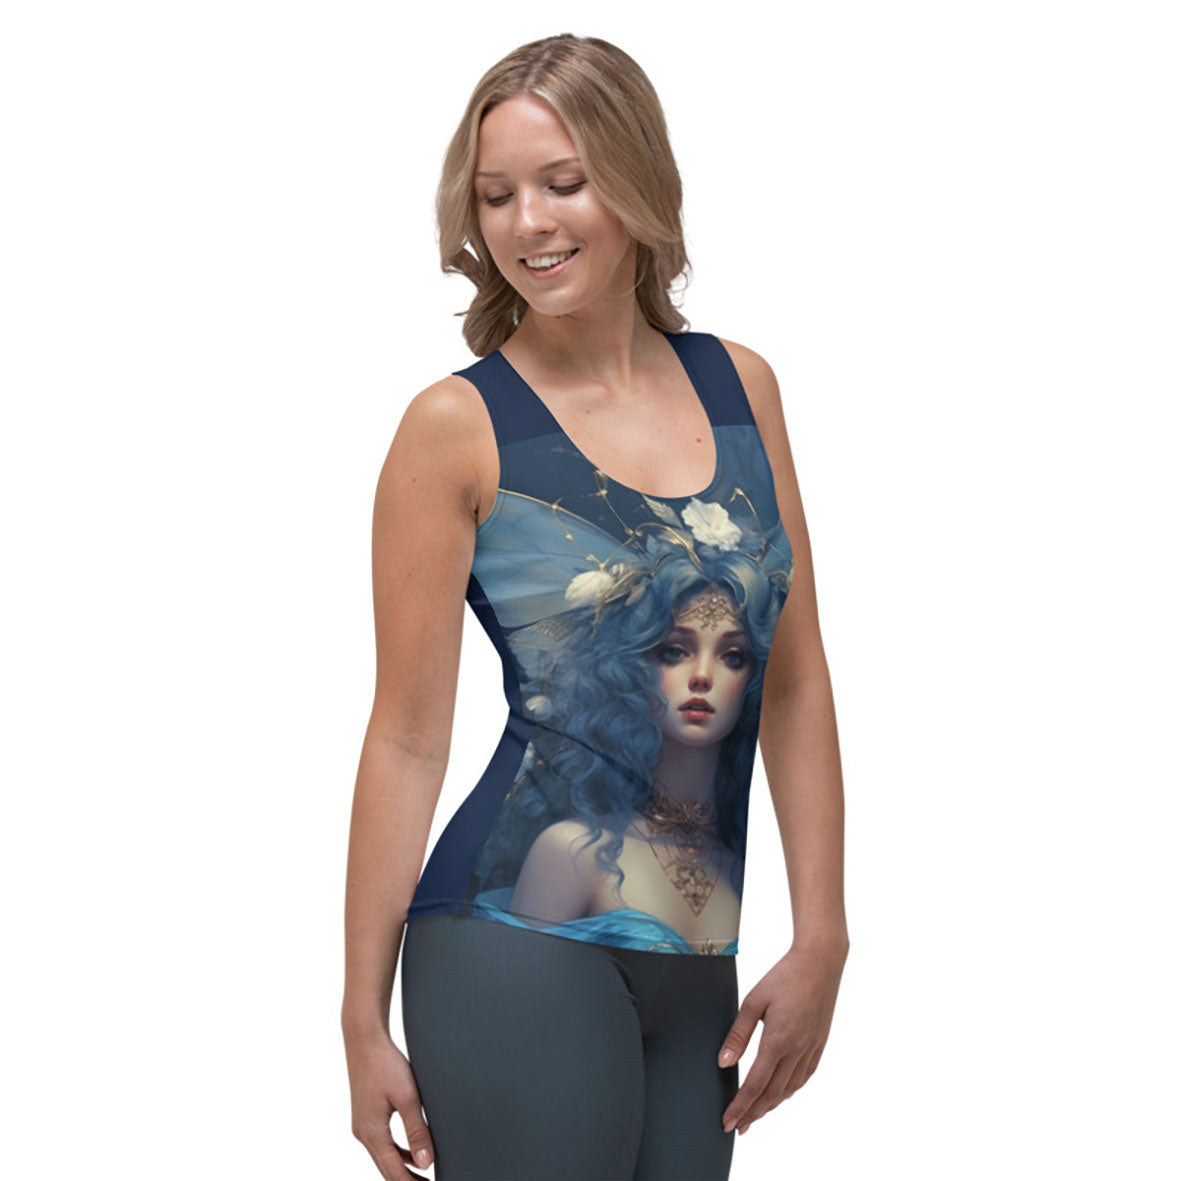 Captivate and Charm: Step into a World of Wonder with Our French Fairy Tank Top!